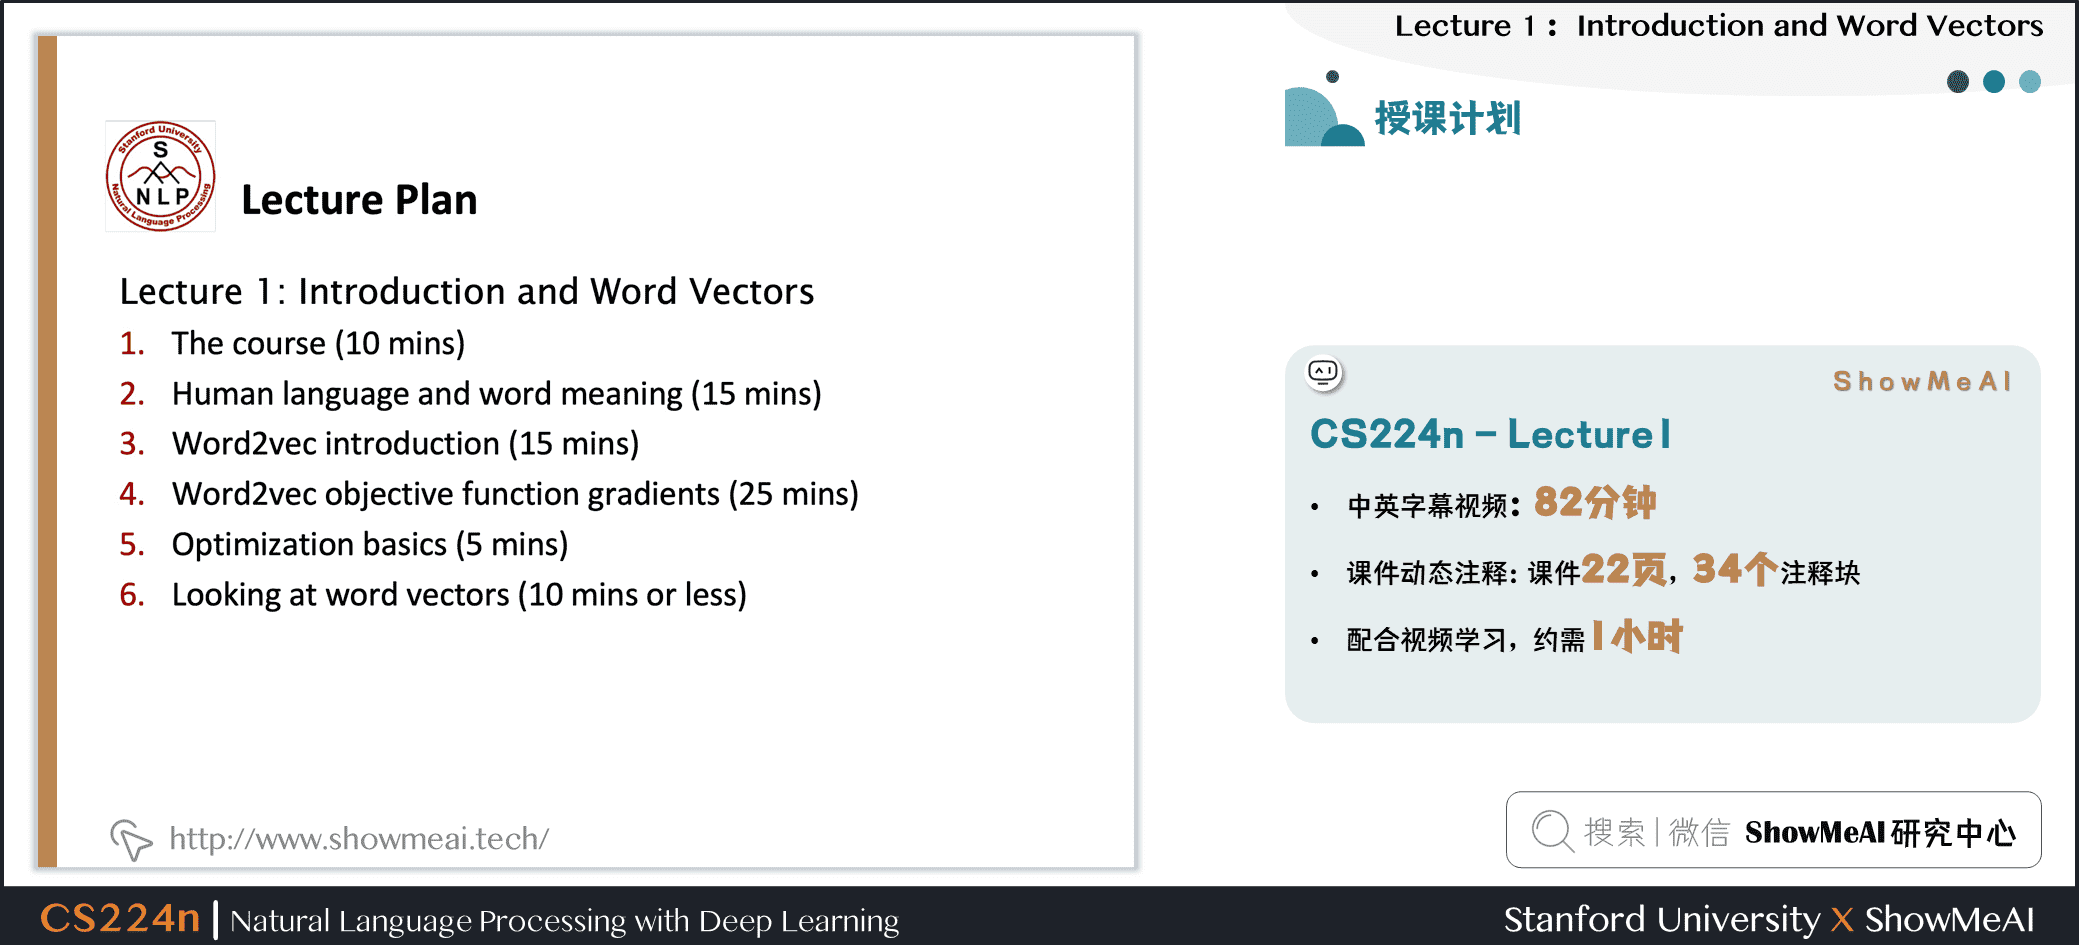 Introduction and Word Vectors